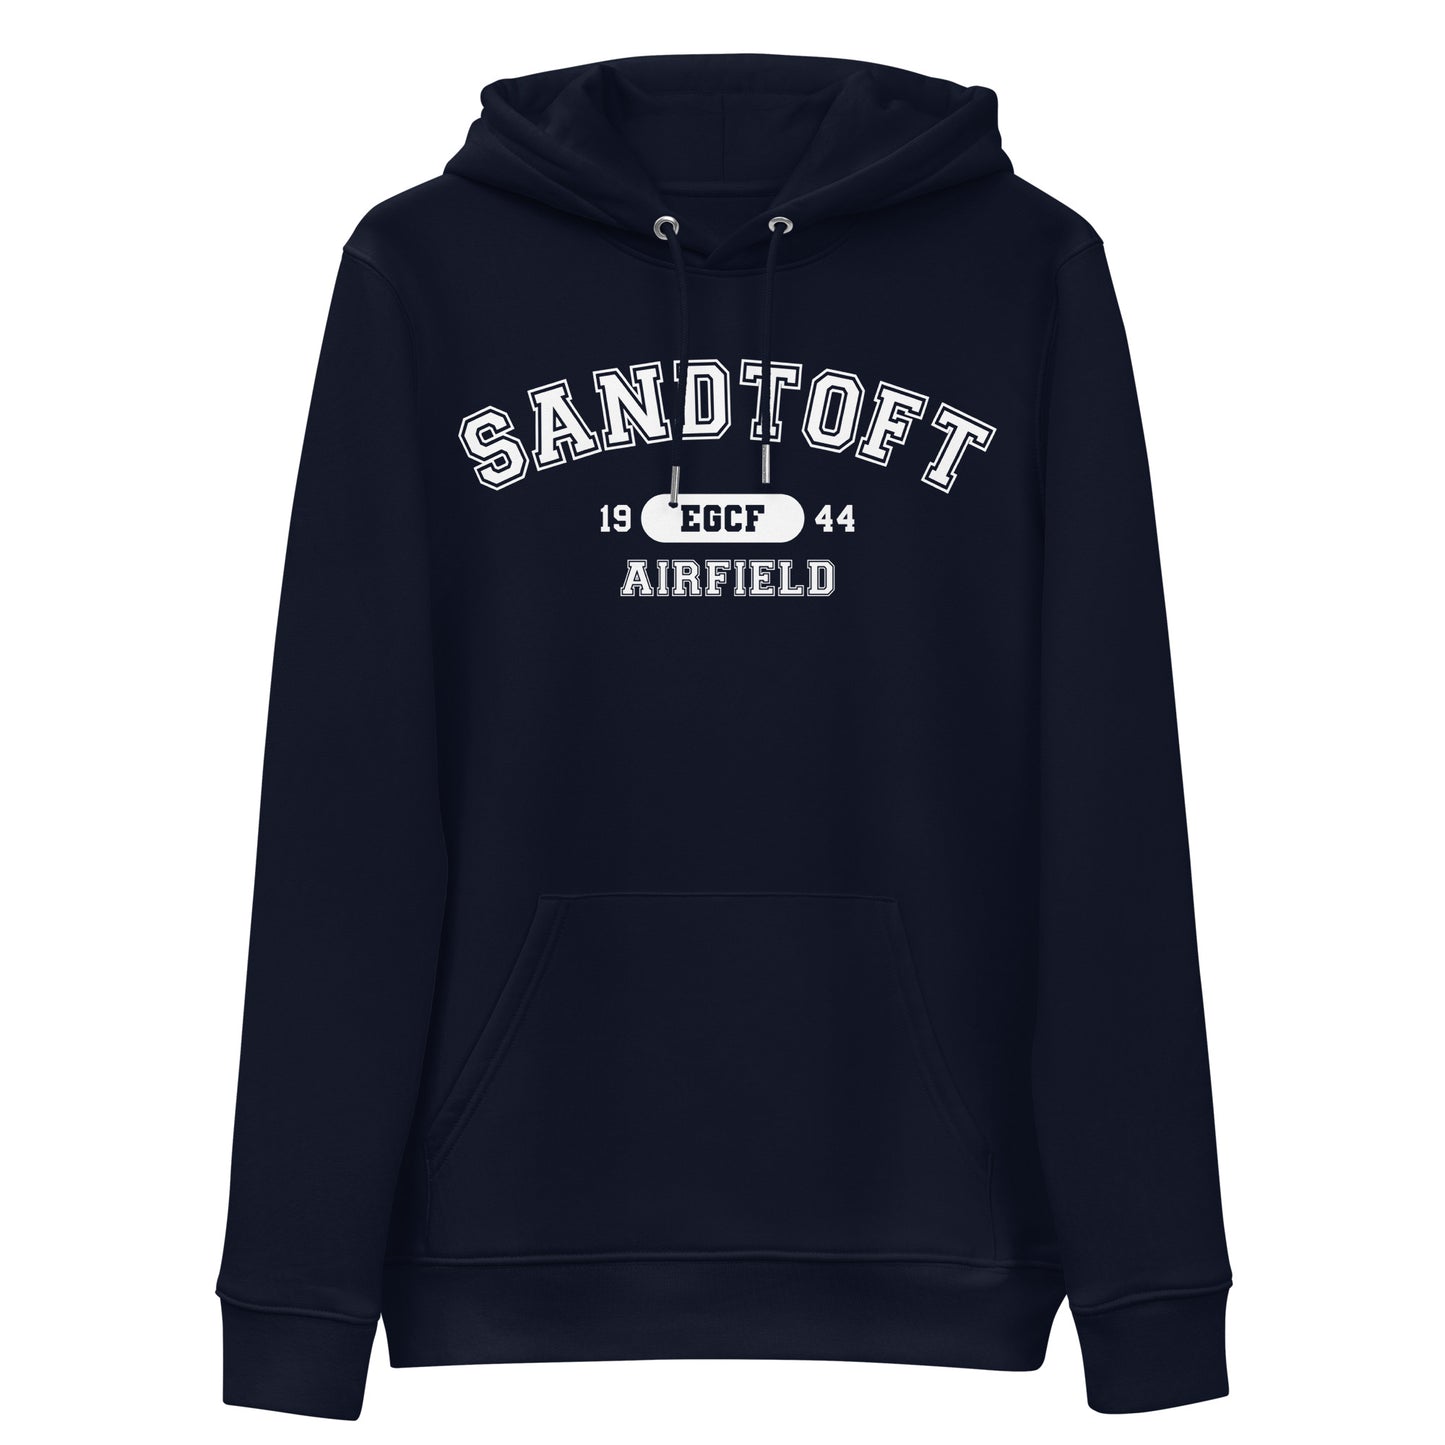 Sandtoft Airfield with ICAO code in collegiate style. Unisex essential eco hoodie.